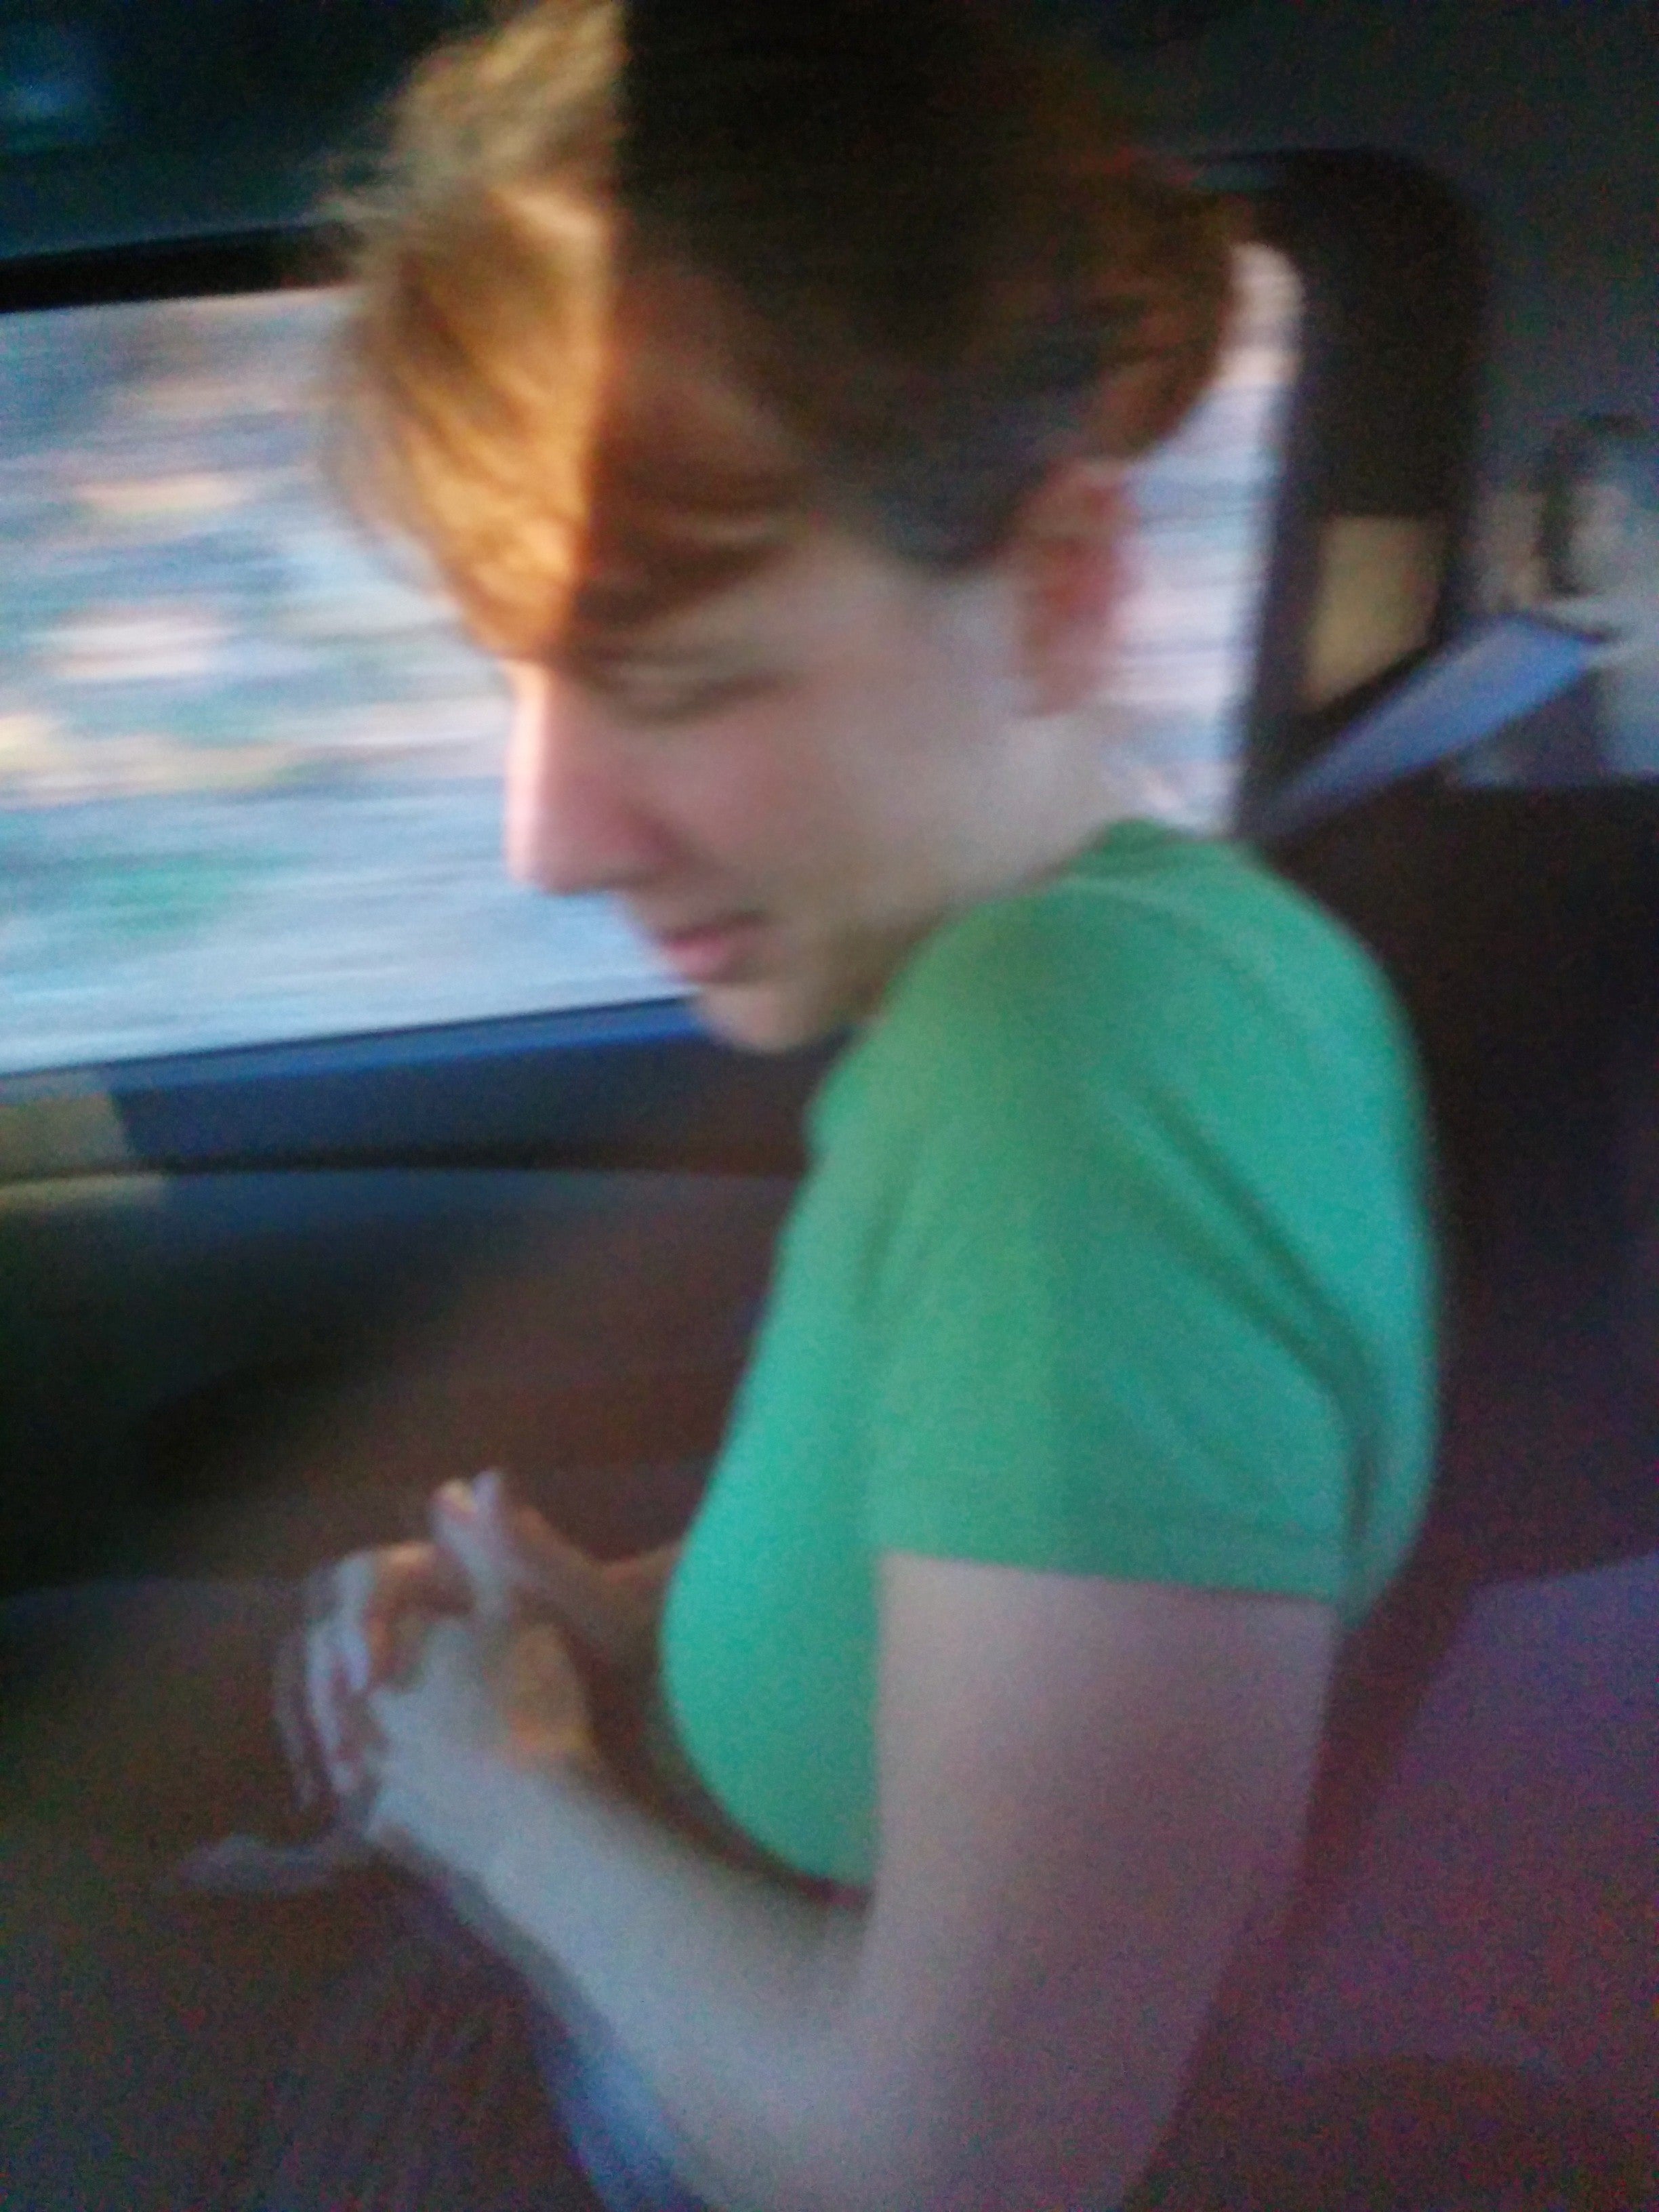 Blurry profile photo of Kristen Pol that her son took while in the car. She's wearing a green shirt and her hair looks reddish brown.